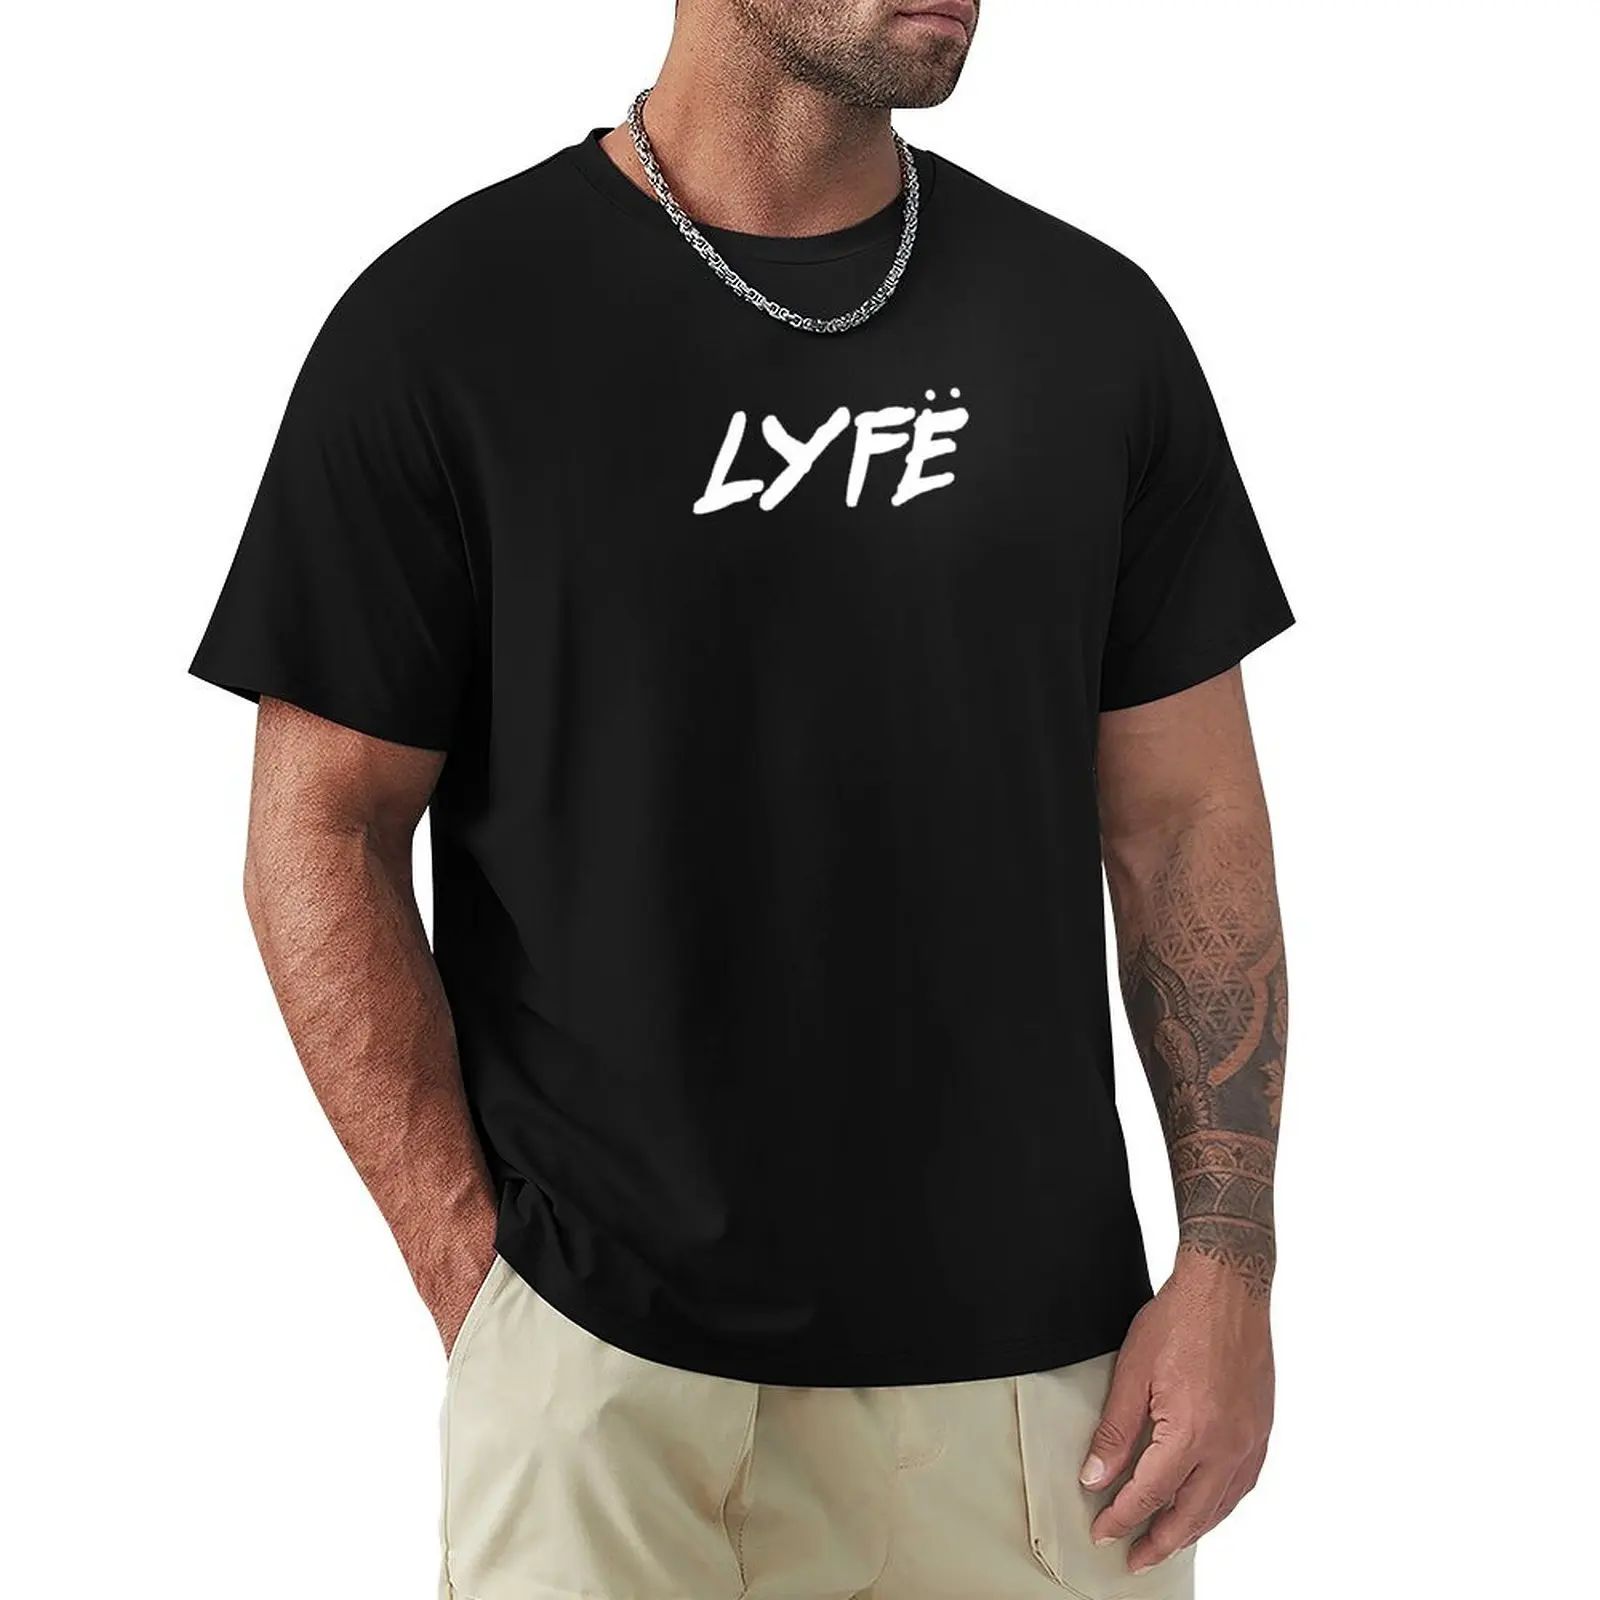 Yeat LYF? Merch T-Shirt anime cute clothes Aesthetic clothing Men's clothing